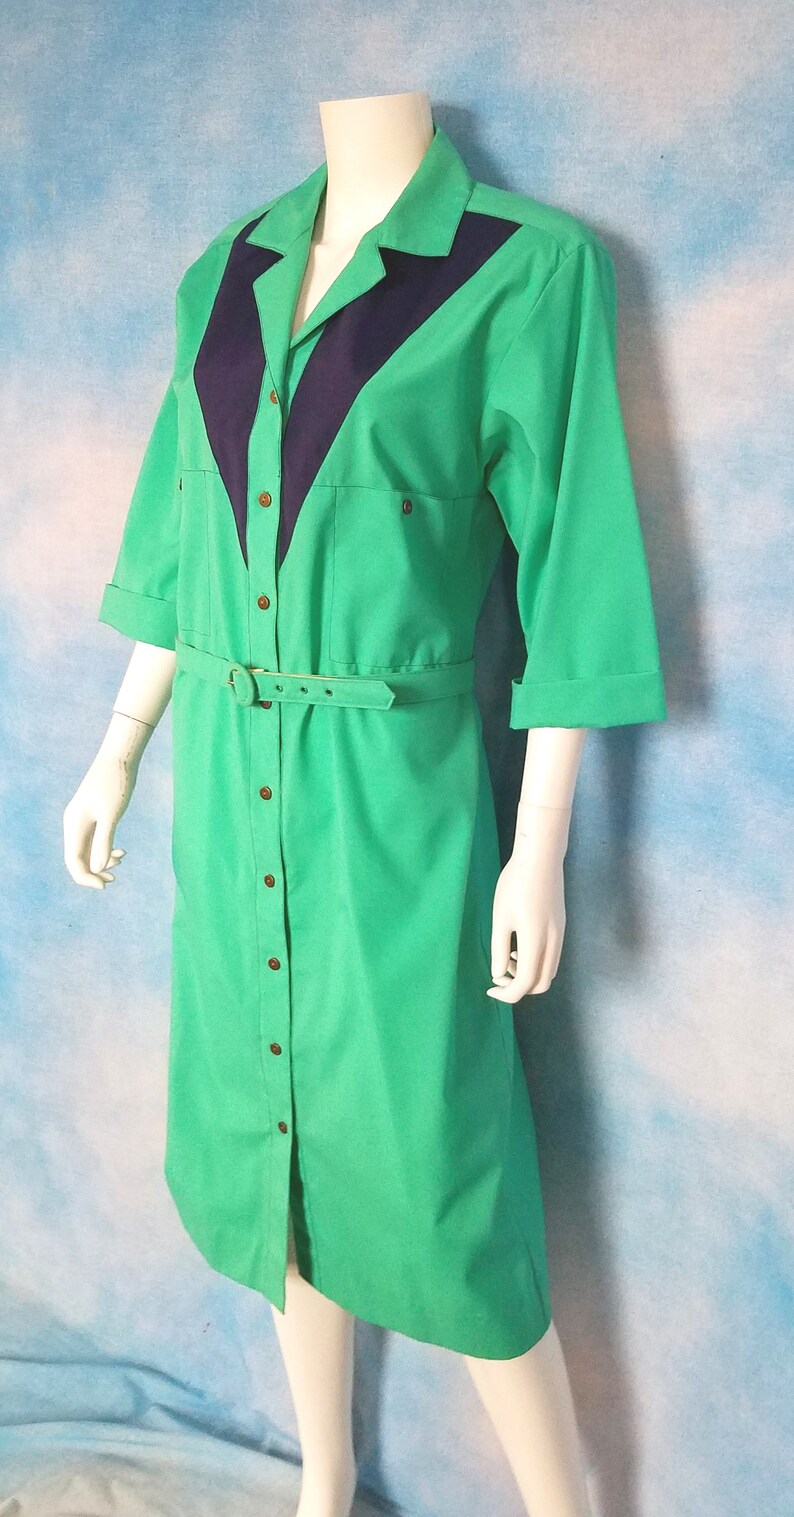 Vintage 80s Aqua and Navy Cotton Poly Western Belted Shift Shirt Dress with Cuffed Sleeves, Brass Buttons/ Willi of California/ Size 14 image 3